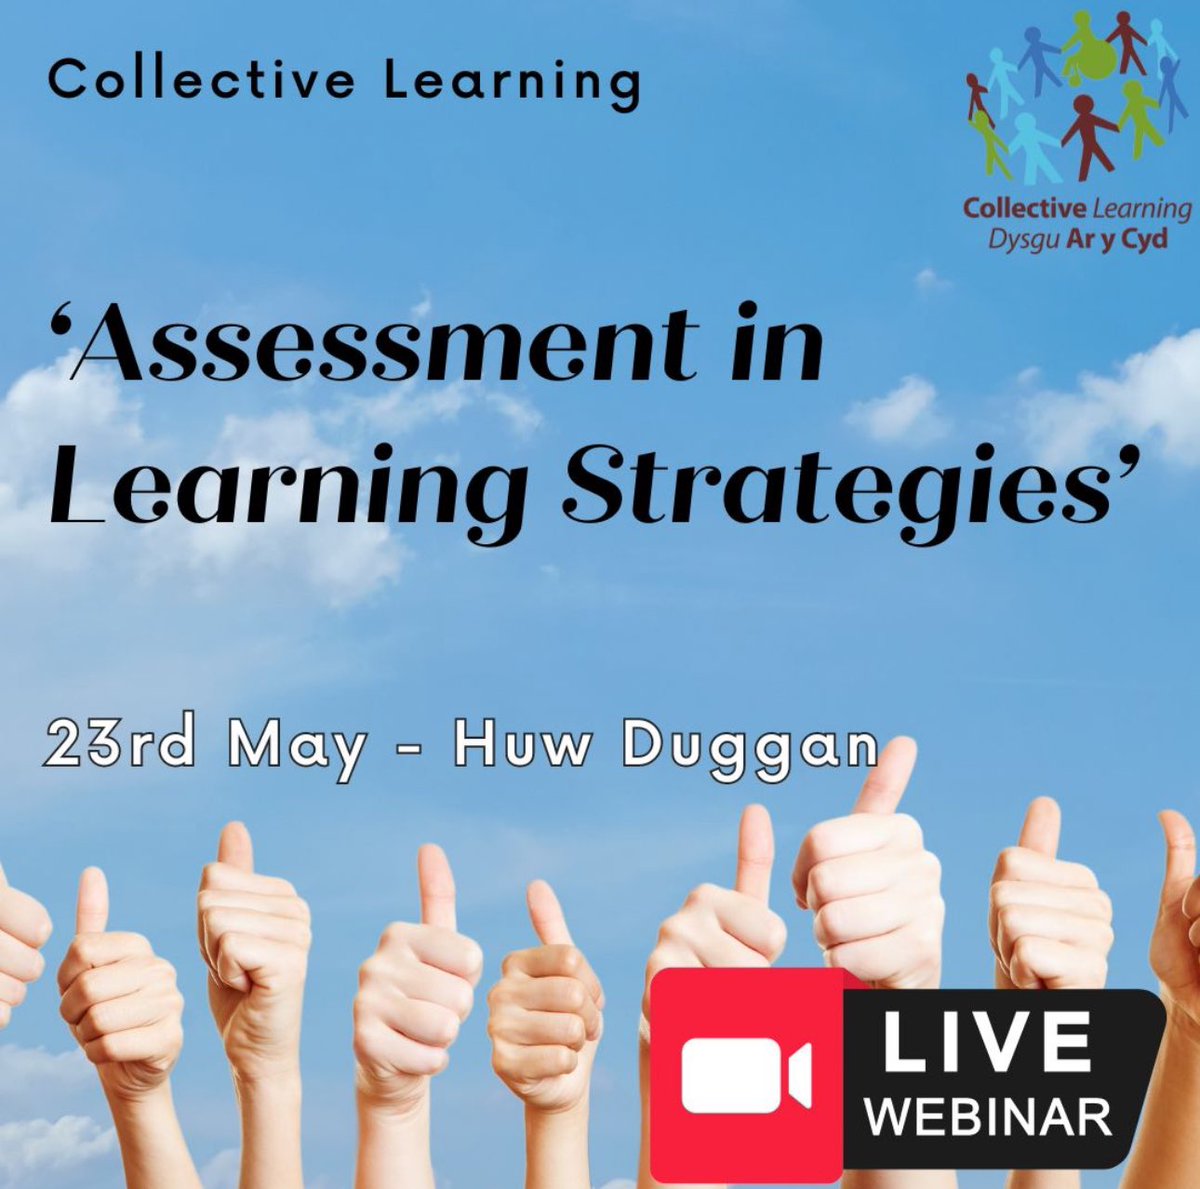 LIVE WEBINAR with Huw Duggan - 'Assessment IN Learning Strategies' 
May 23rd 
Contact us for booking 

#assessmentinlearning #primaryeducation #primaryschool #assessmentinlearning #primaryeducation #primaryschool #cpd